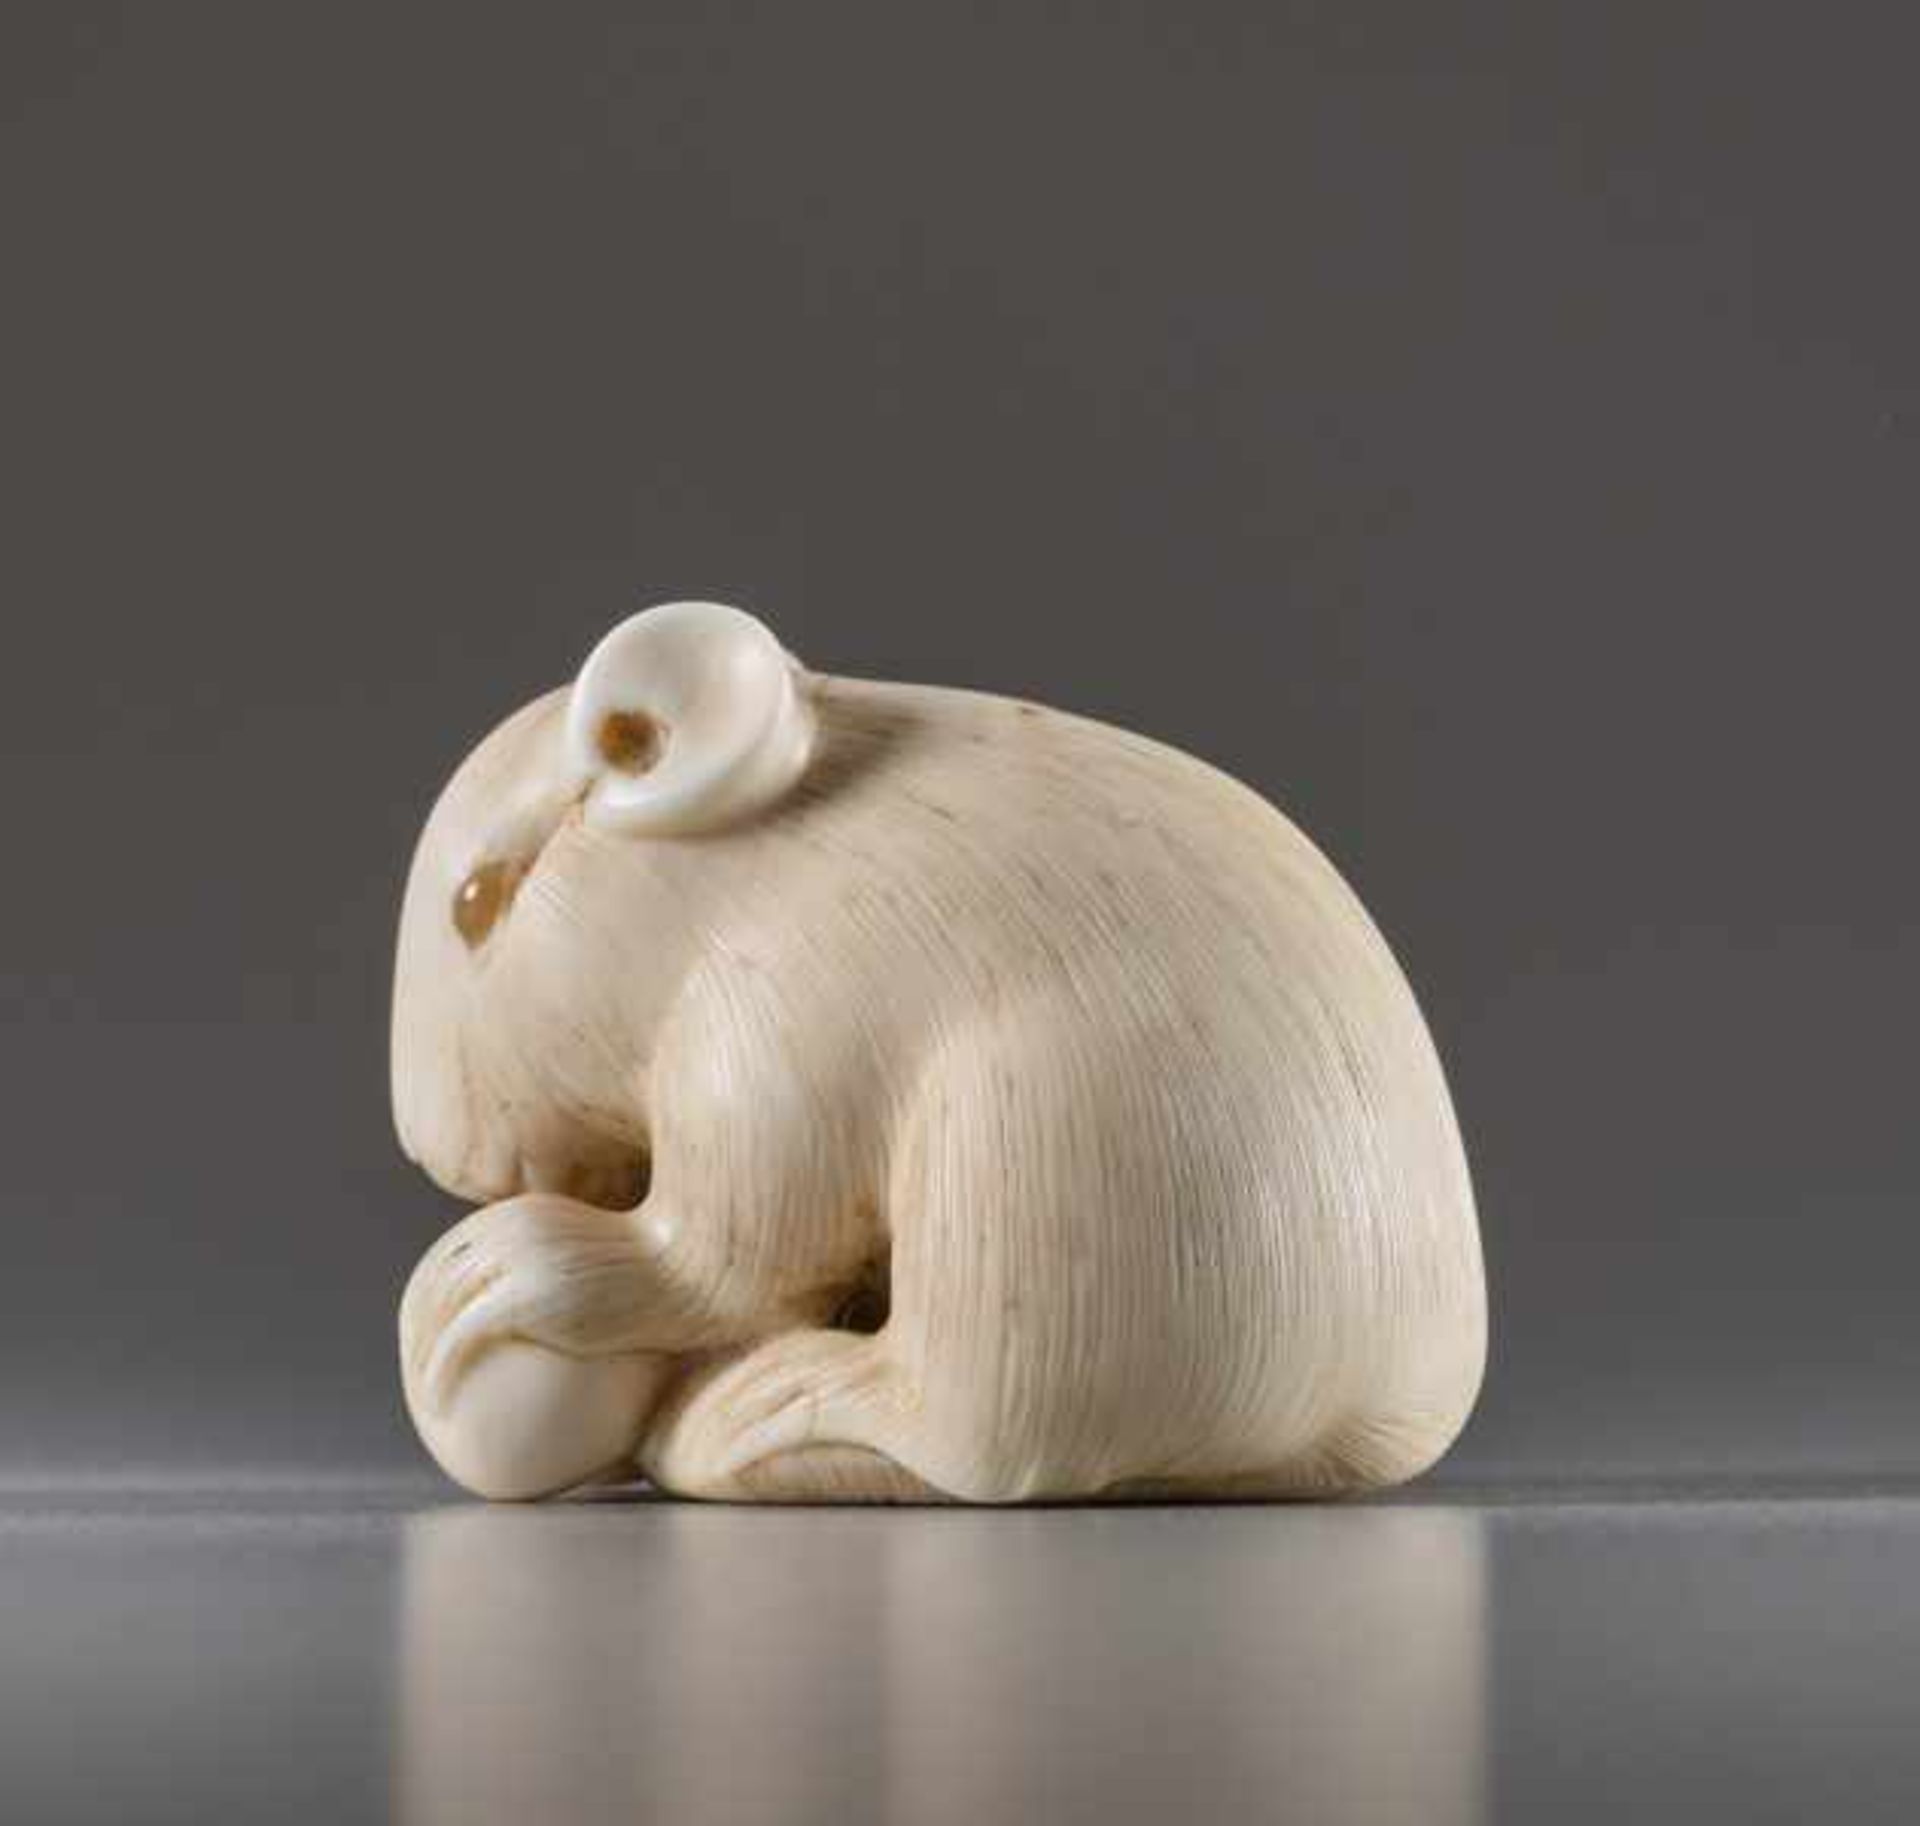 AN IVORY NETSUKE BY IKKO OF A RAT WITH DOUBLE GOURD Ivory netsuke. Japan, 19th centuryA very - Image 5 of 6